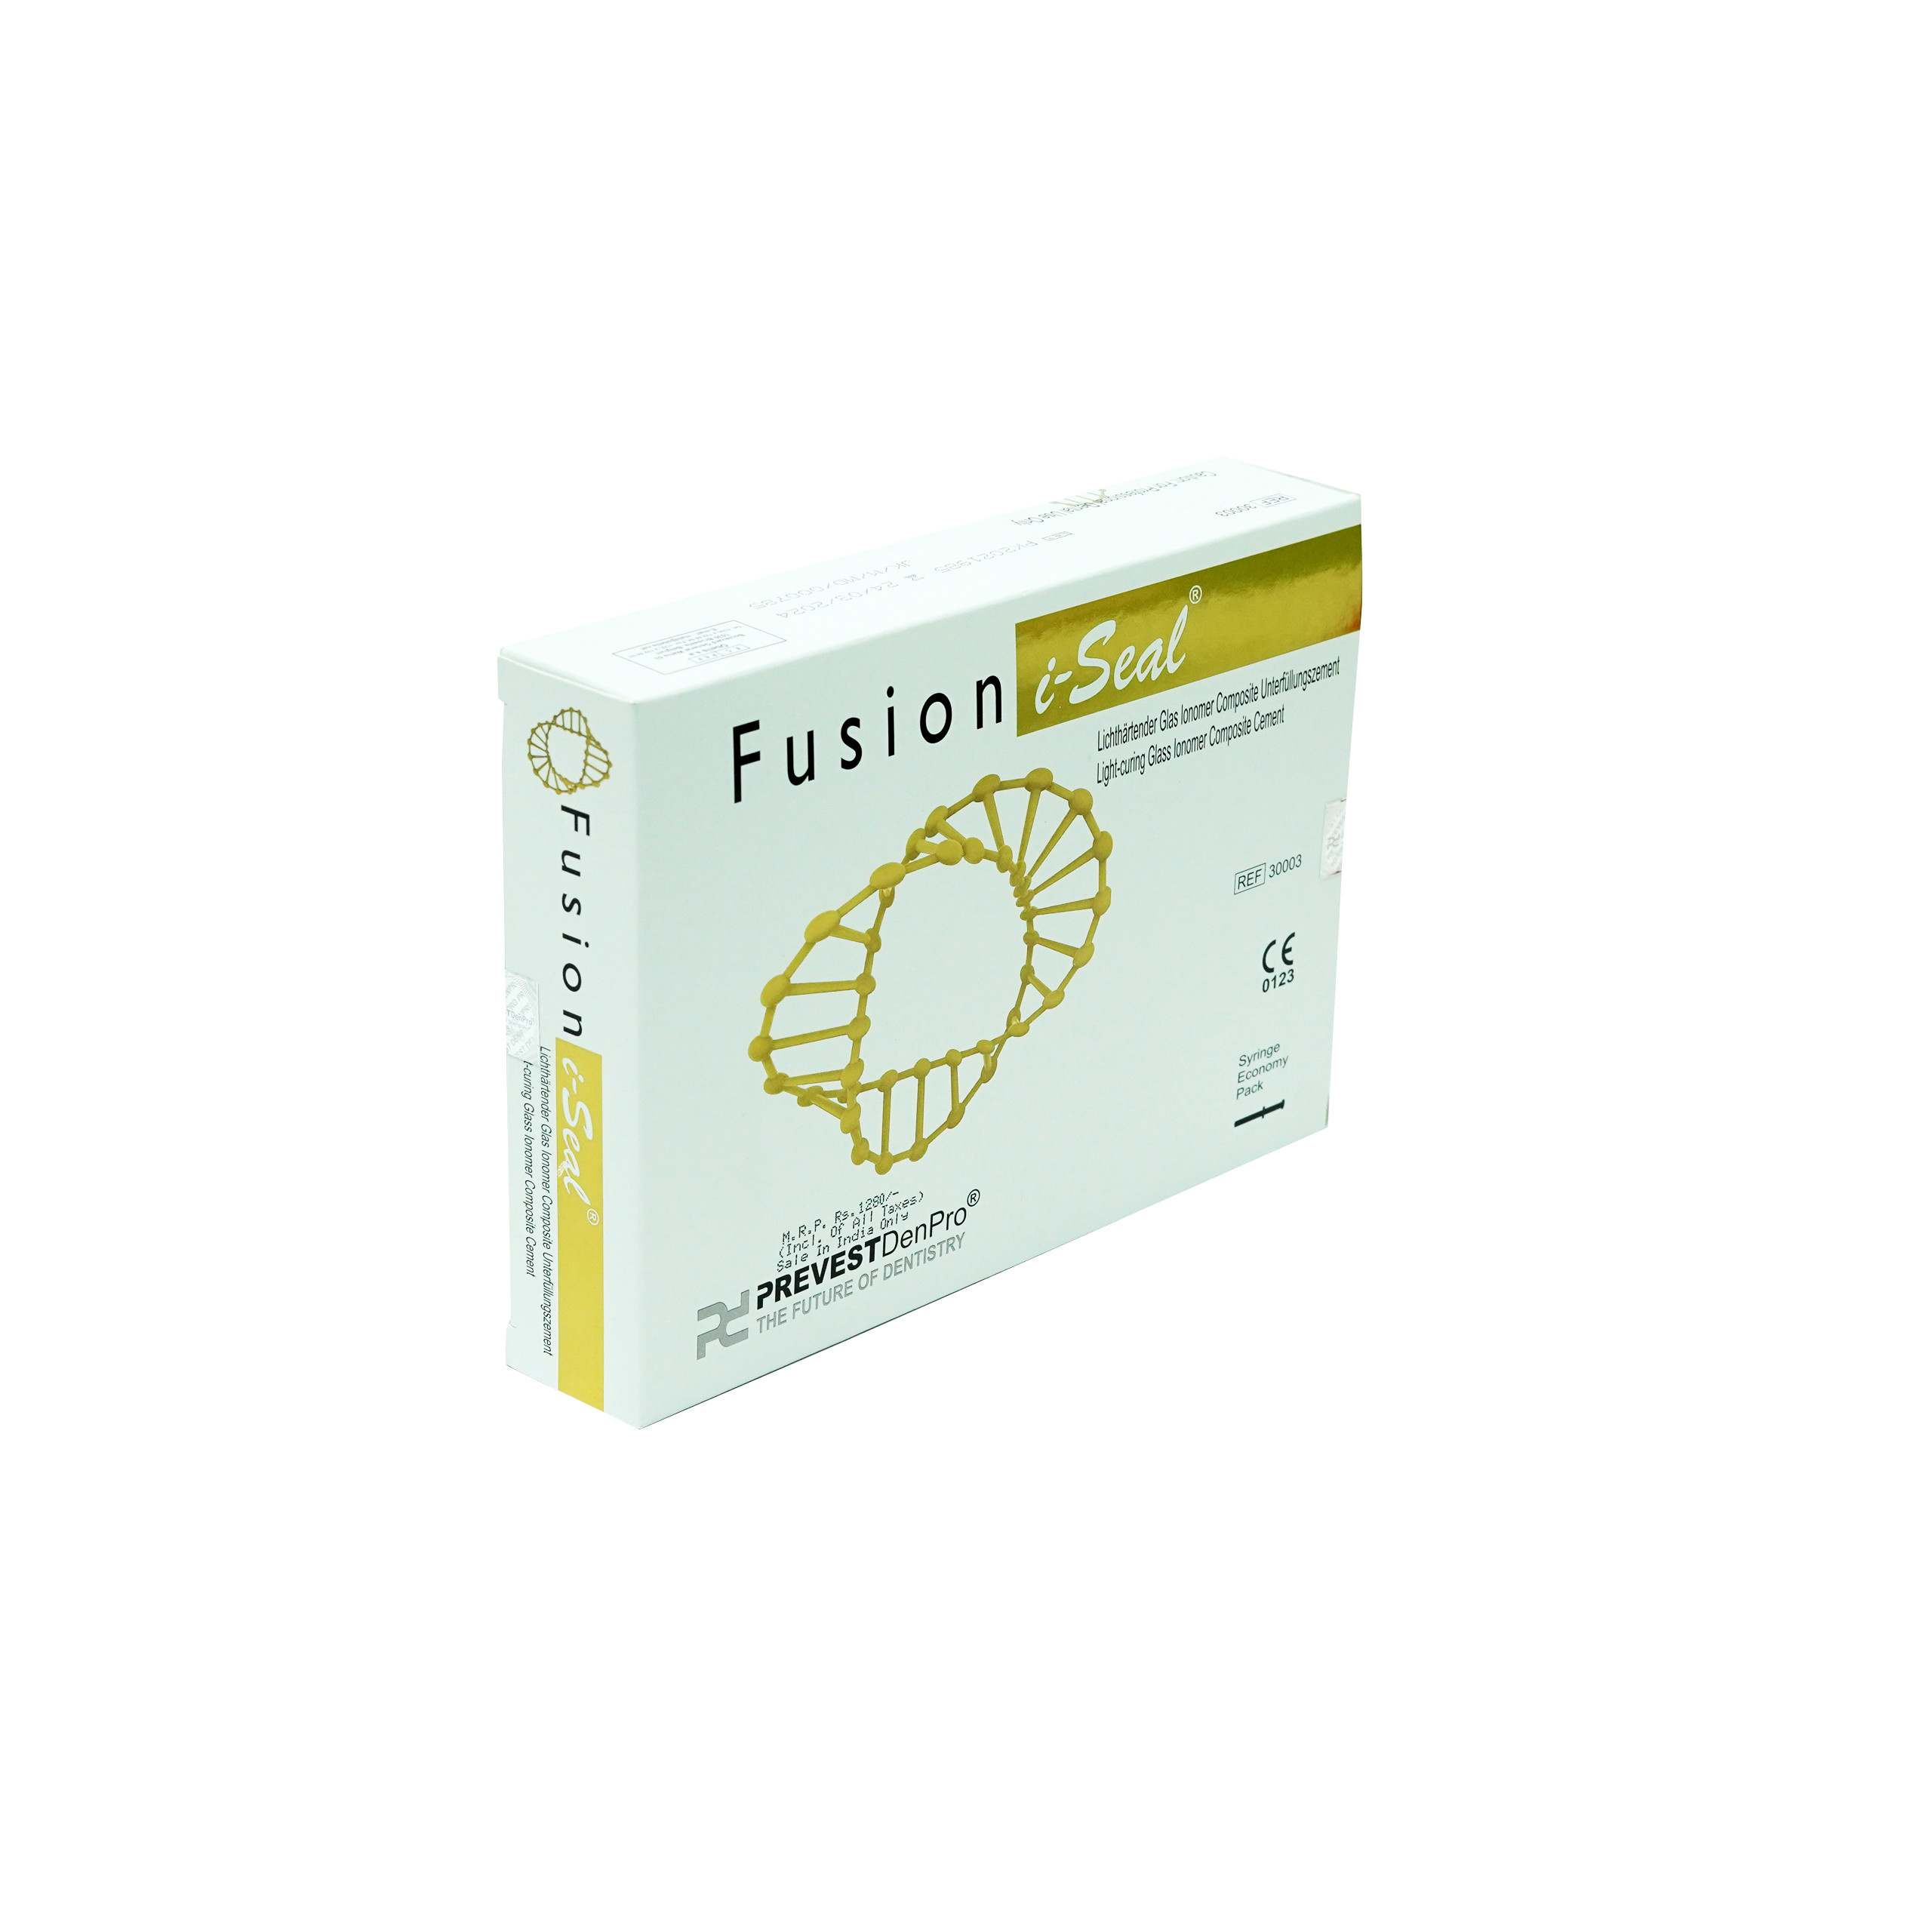 Prevest Denpro Fusion I Seal 4x2gm Light Cure Glass Ionomer Cement